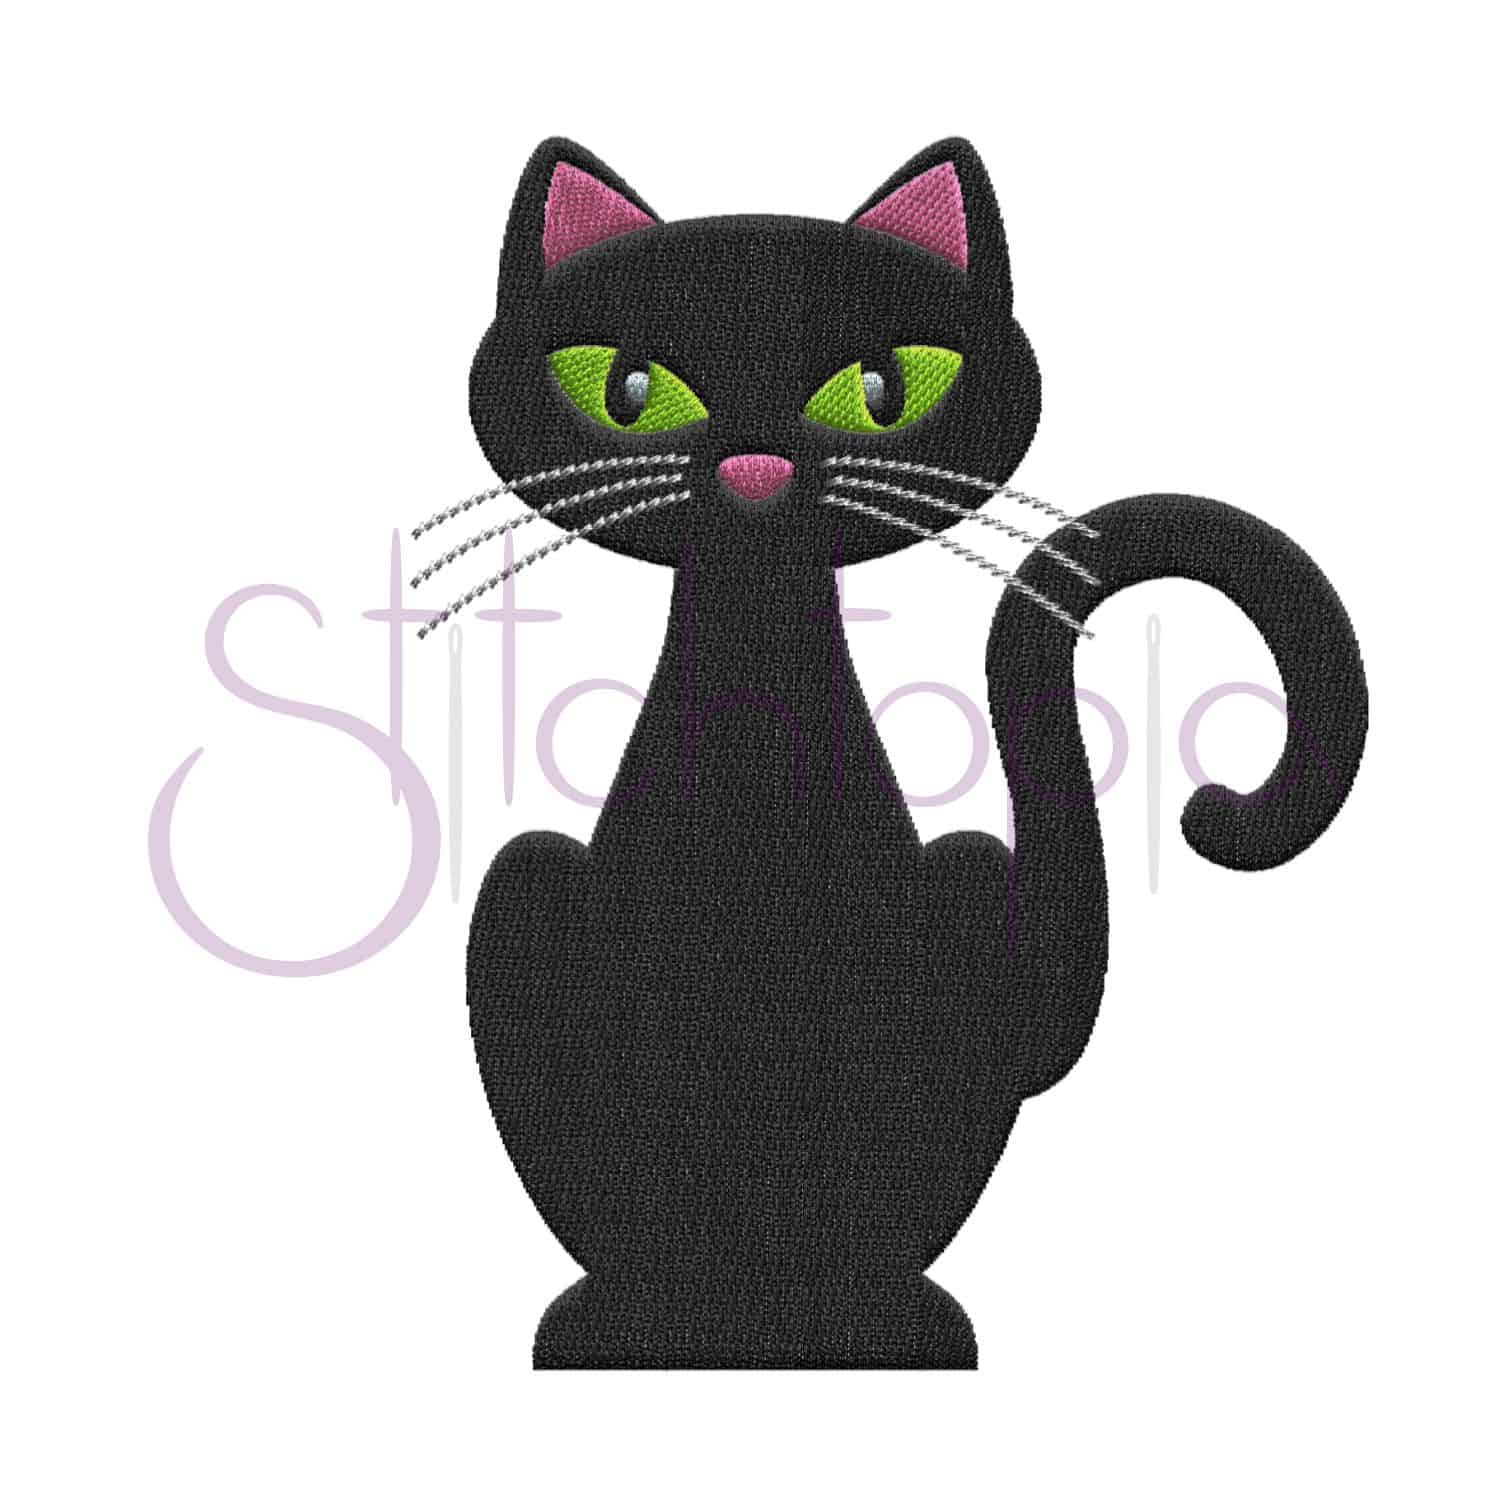 Embroidery File Cat